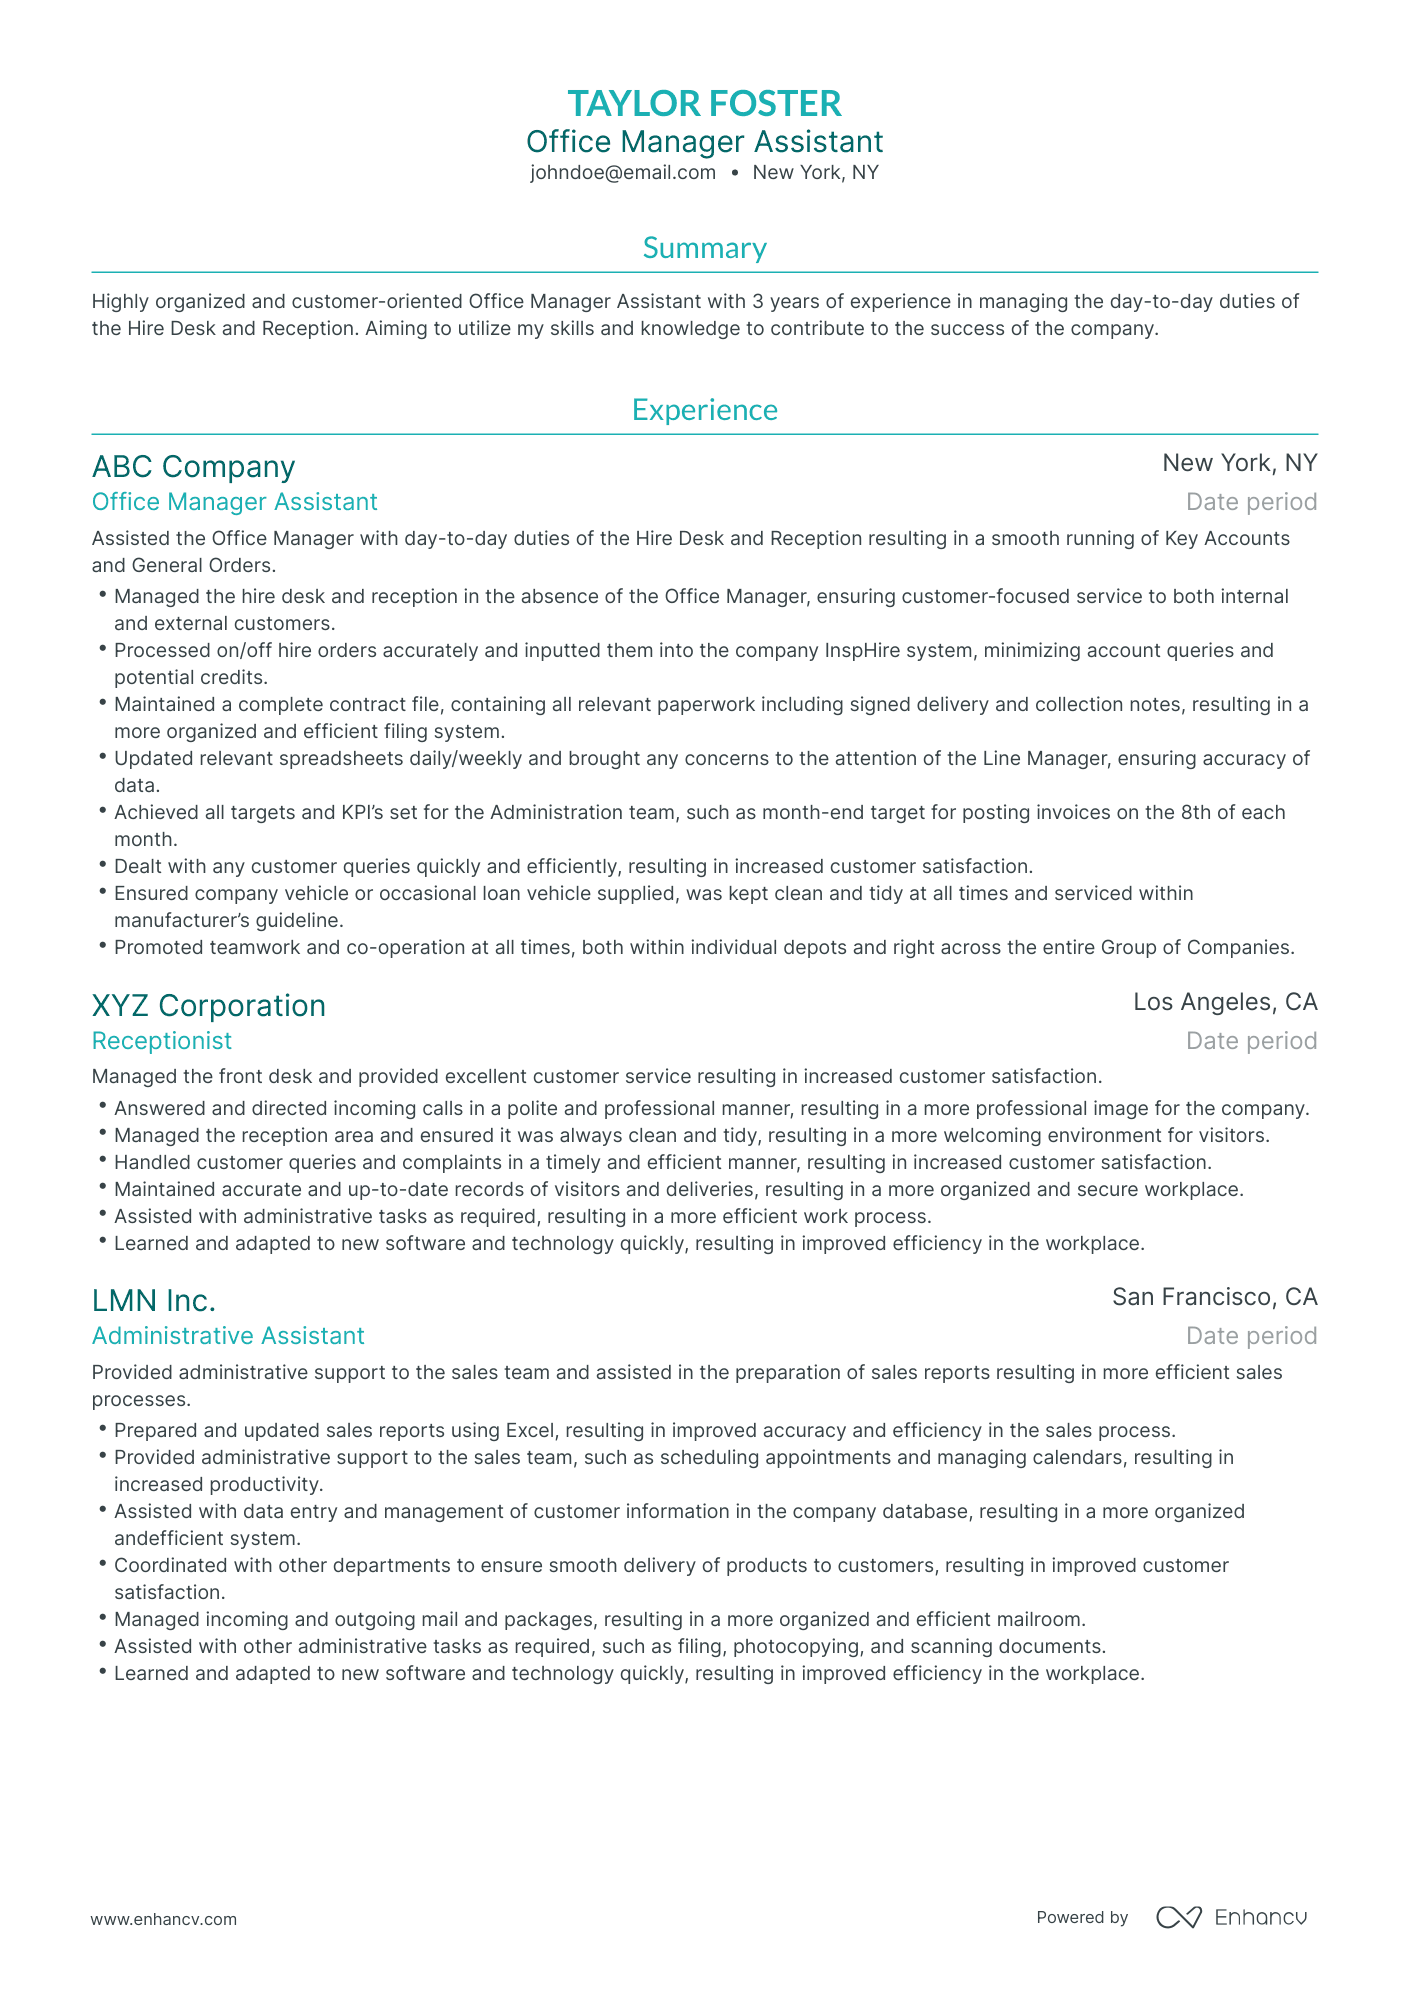 Traditional Office Manager Assistant Resume Template